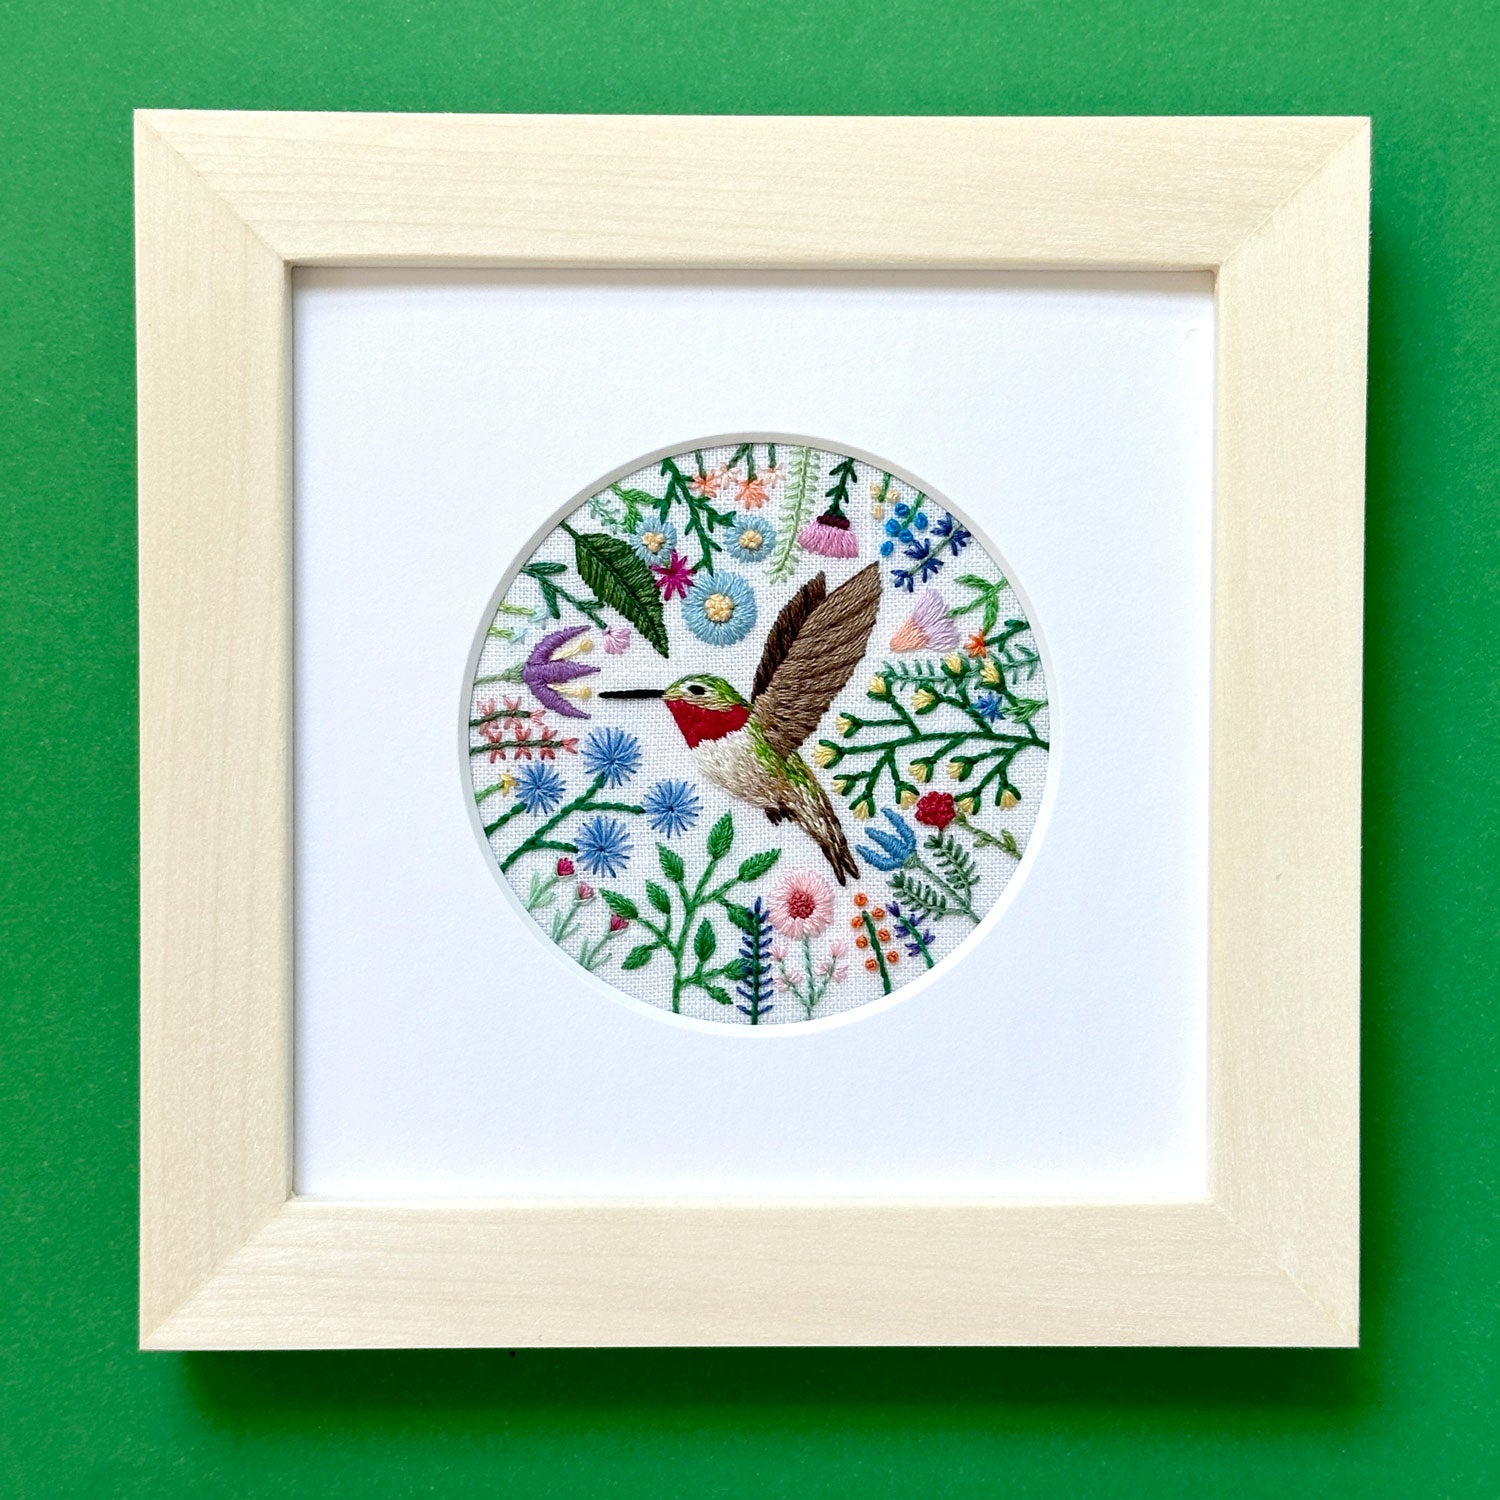 Hummingbird and Flowers on White Linen Hand Embroidered Art